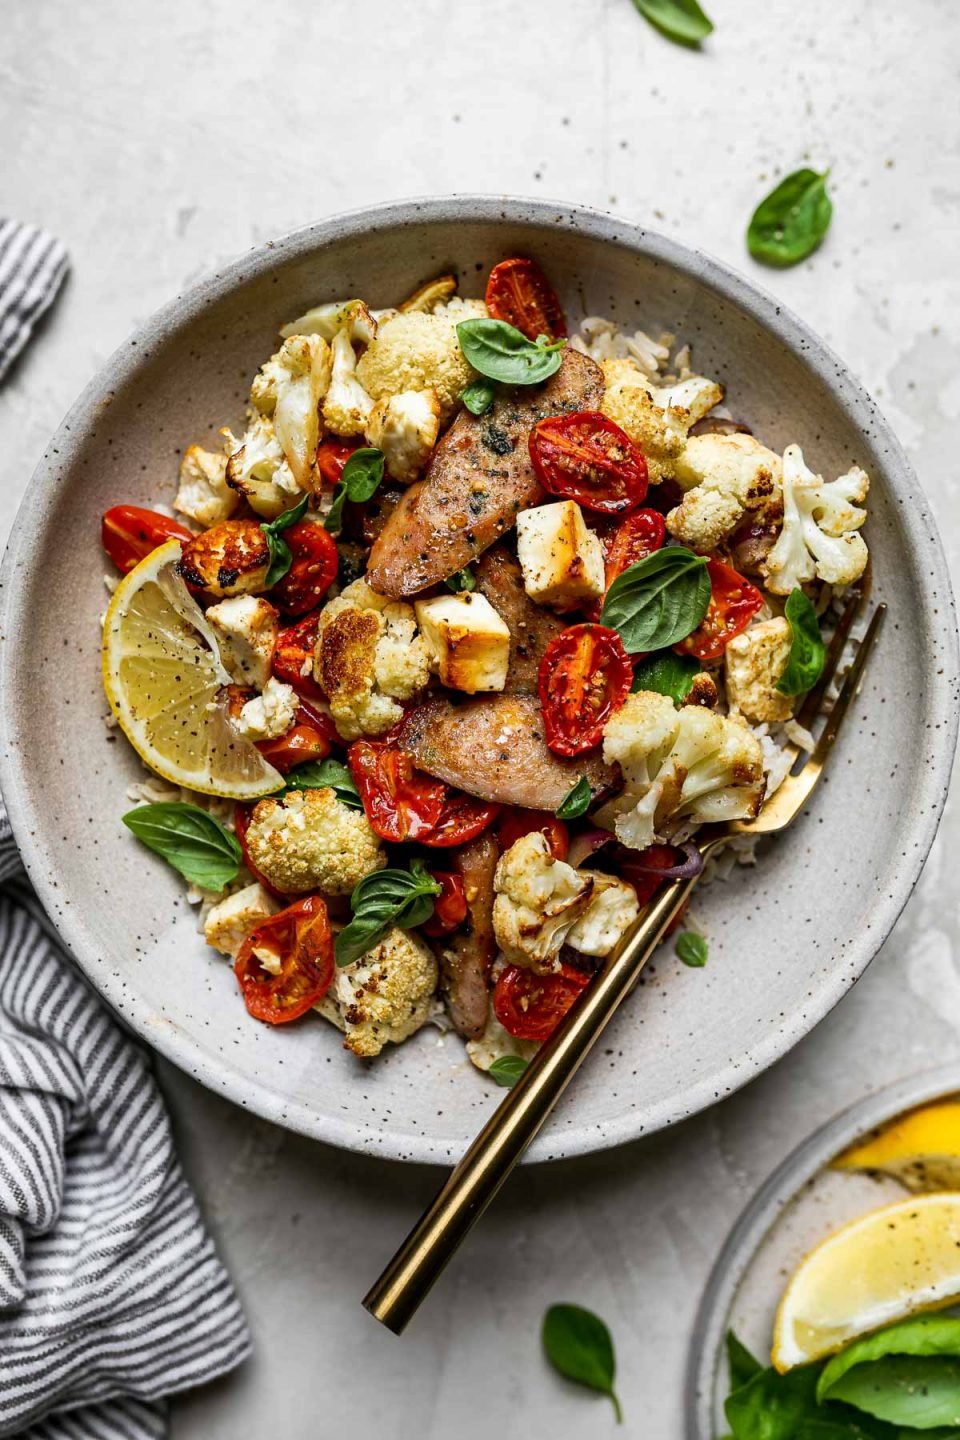 Sheet Pan Chicken Sausage and Veggies plated in a gray ceramic bowl over rice. The bowl has a gold fork in it and sits atop a creamy cement surface alongside a gray striped linen napkin, fresh basil leaves, & a small plate of lemon wedges & basil leaves for serving.